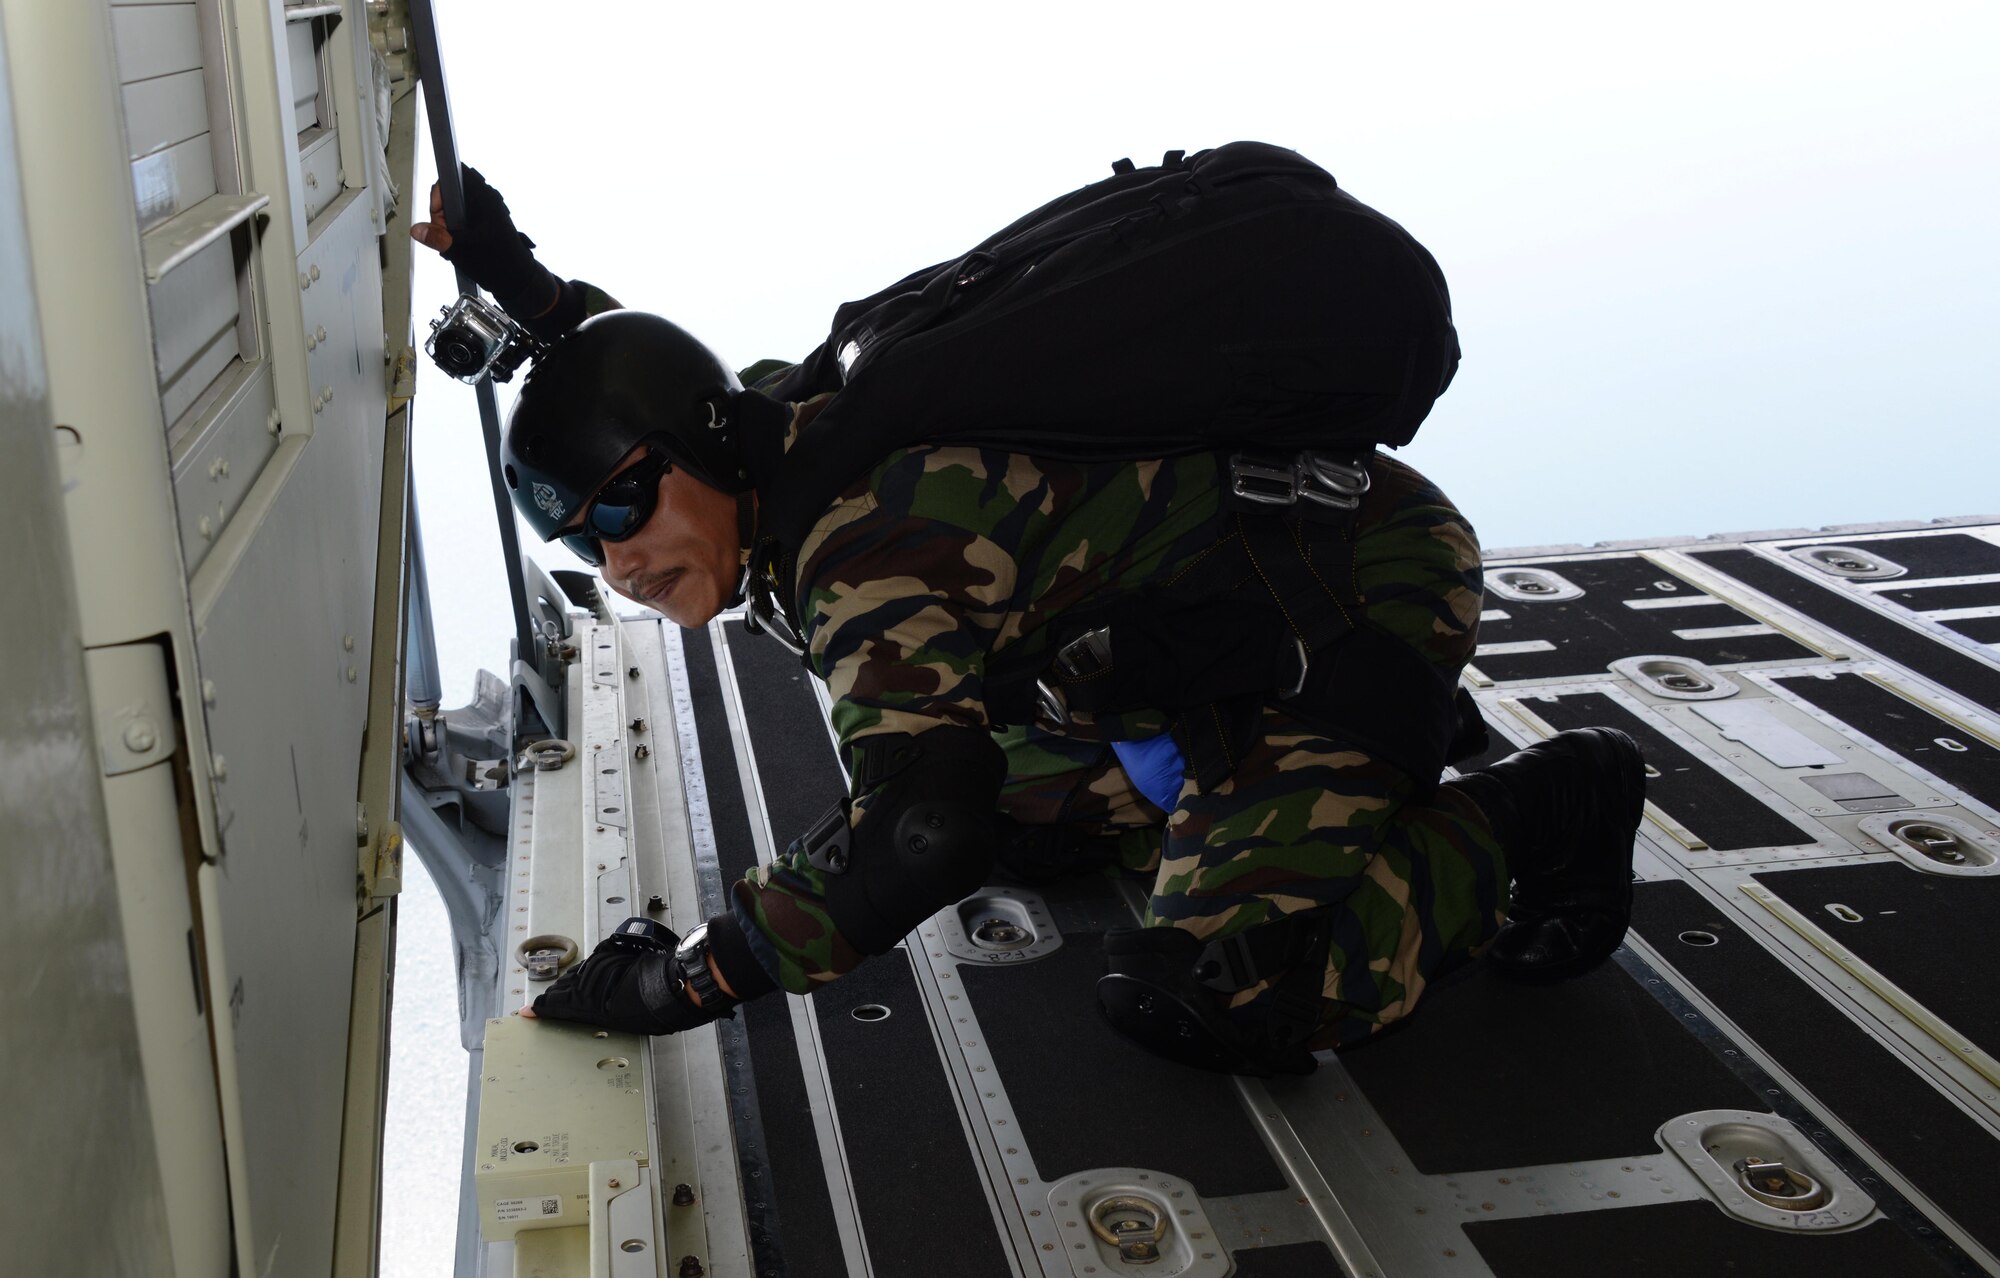 A member from the Royal Malaysian Air Force Pasukan Khas Udara locates the drop zone from an MC-130J Commando II near Kuantan, Malaysia, June 8, 2015.  The high-altitude low-opening jumps were conducted as part of Exercise Teak Mint, a multinational and bilateral exercise between the Royal Malaysian Air Force and the U.S. Air Force.  (U.S. Air Force photo by Tech. Sgt. Kristine Dreyer)  